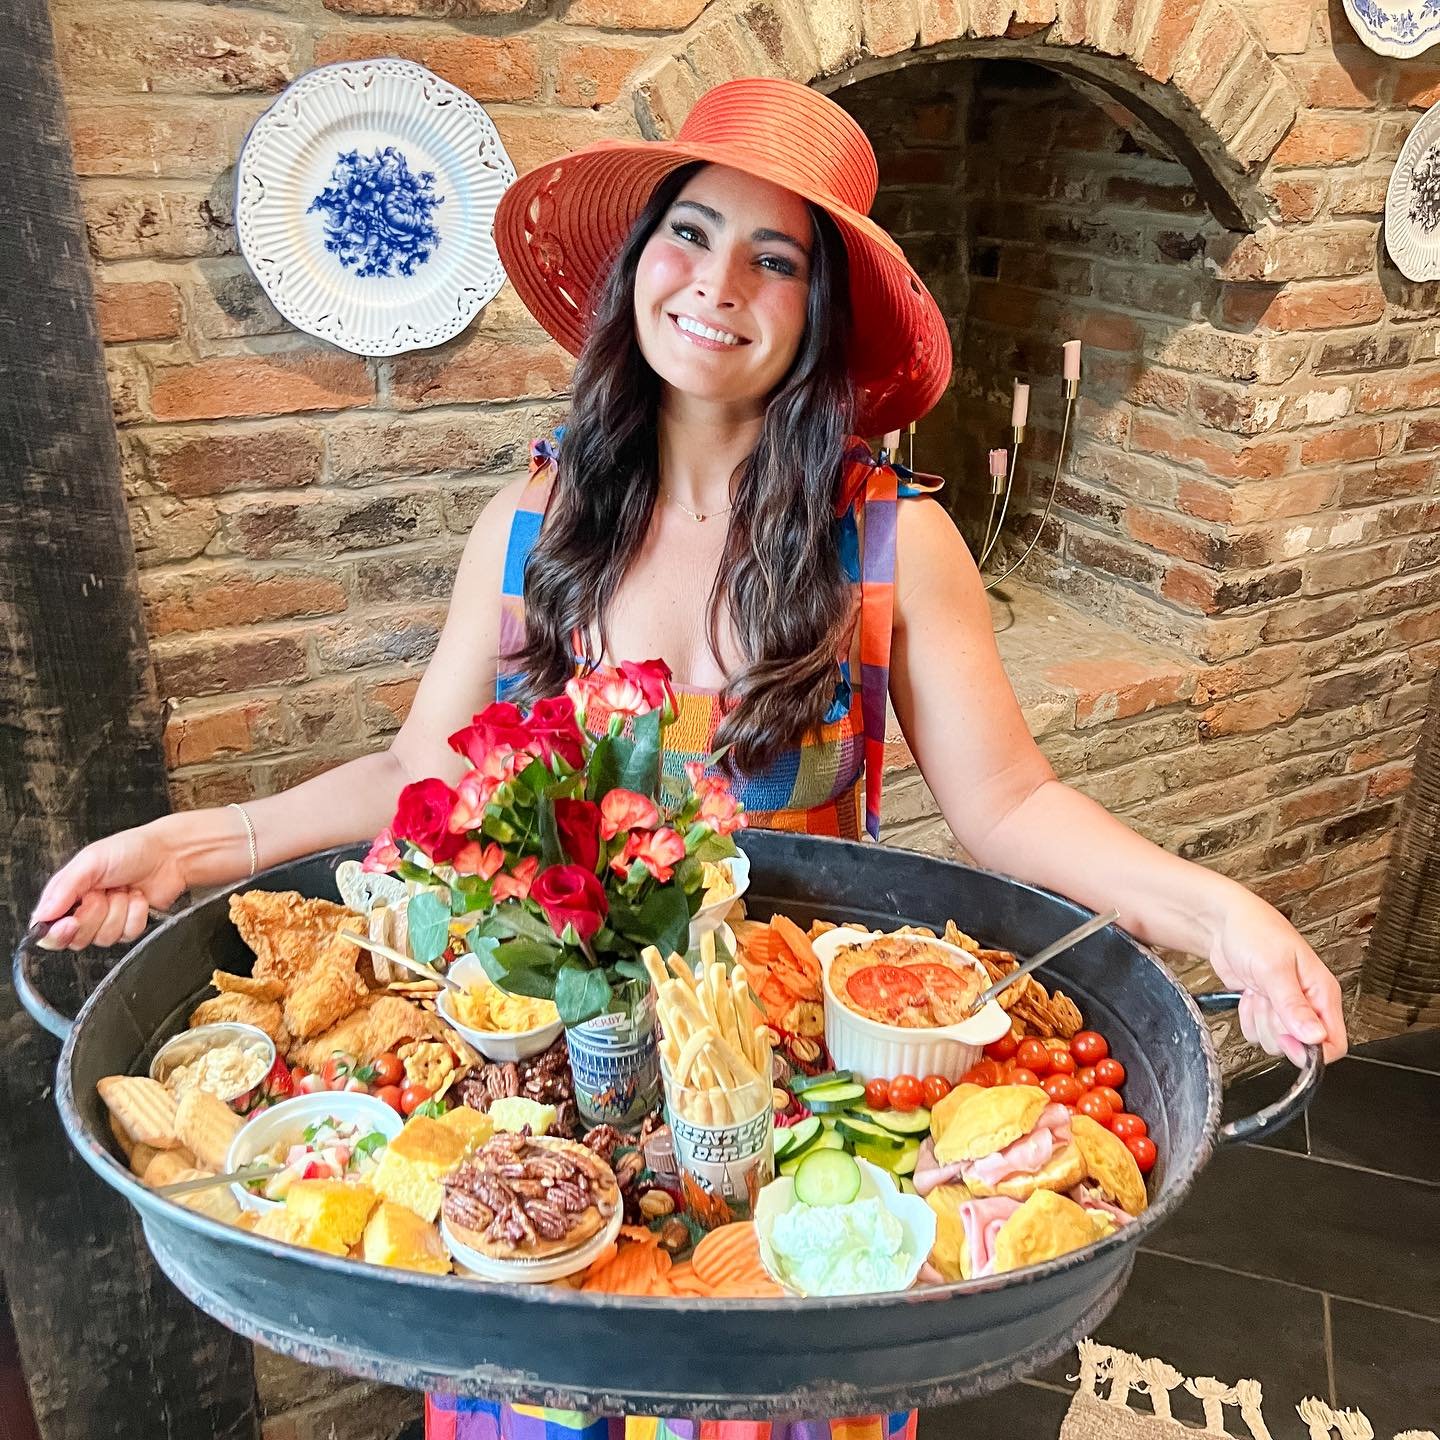 🌹🐎KENTUCKY DERBY RECIPE ROUNDUP 🐎🌹 Featuring hot brown dip, Derby pie milkshakes, mint julep salsa, Kentucky derby board, bourbon Kentucky butter cake, cornbread beef tenderloin crostini, and more! Comment DERBY below and I&rsquo;ll send you the 